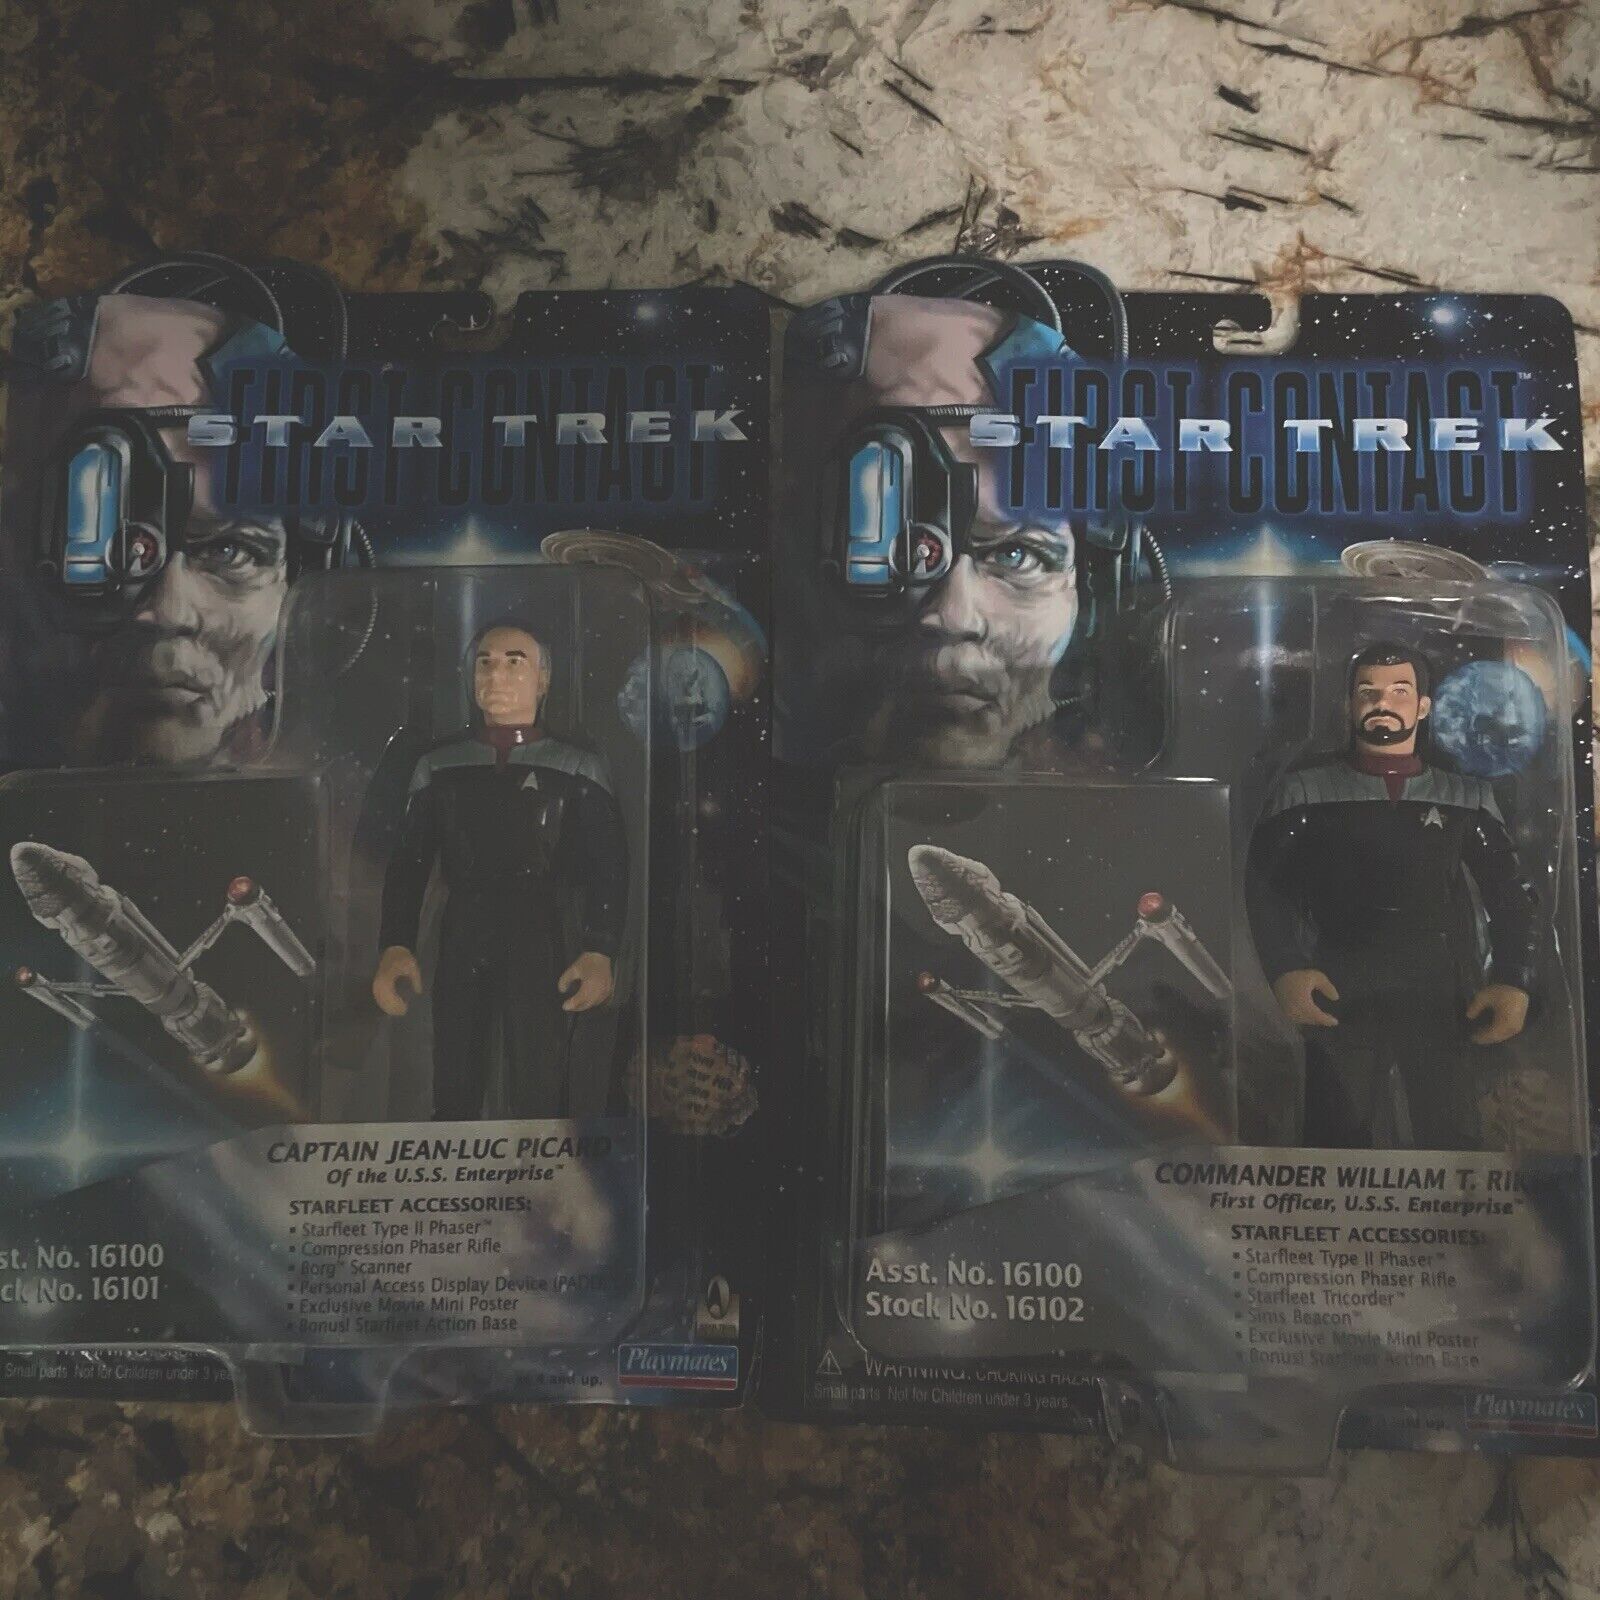 Star Trek First Contact Figures Playmates 1996 Complete Set (Lot of 11)